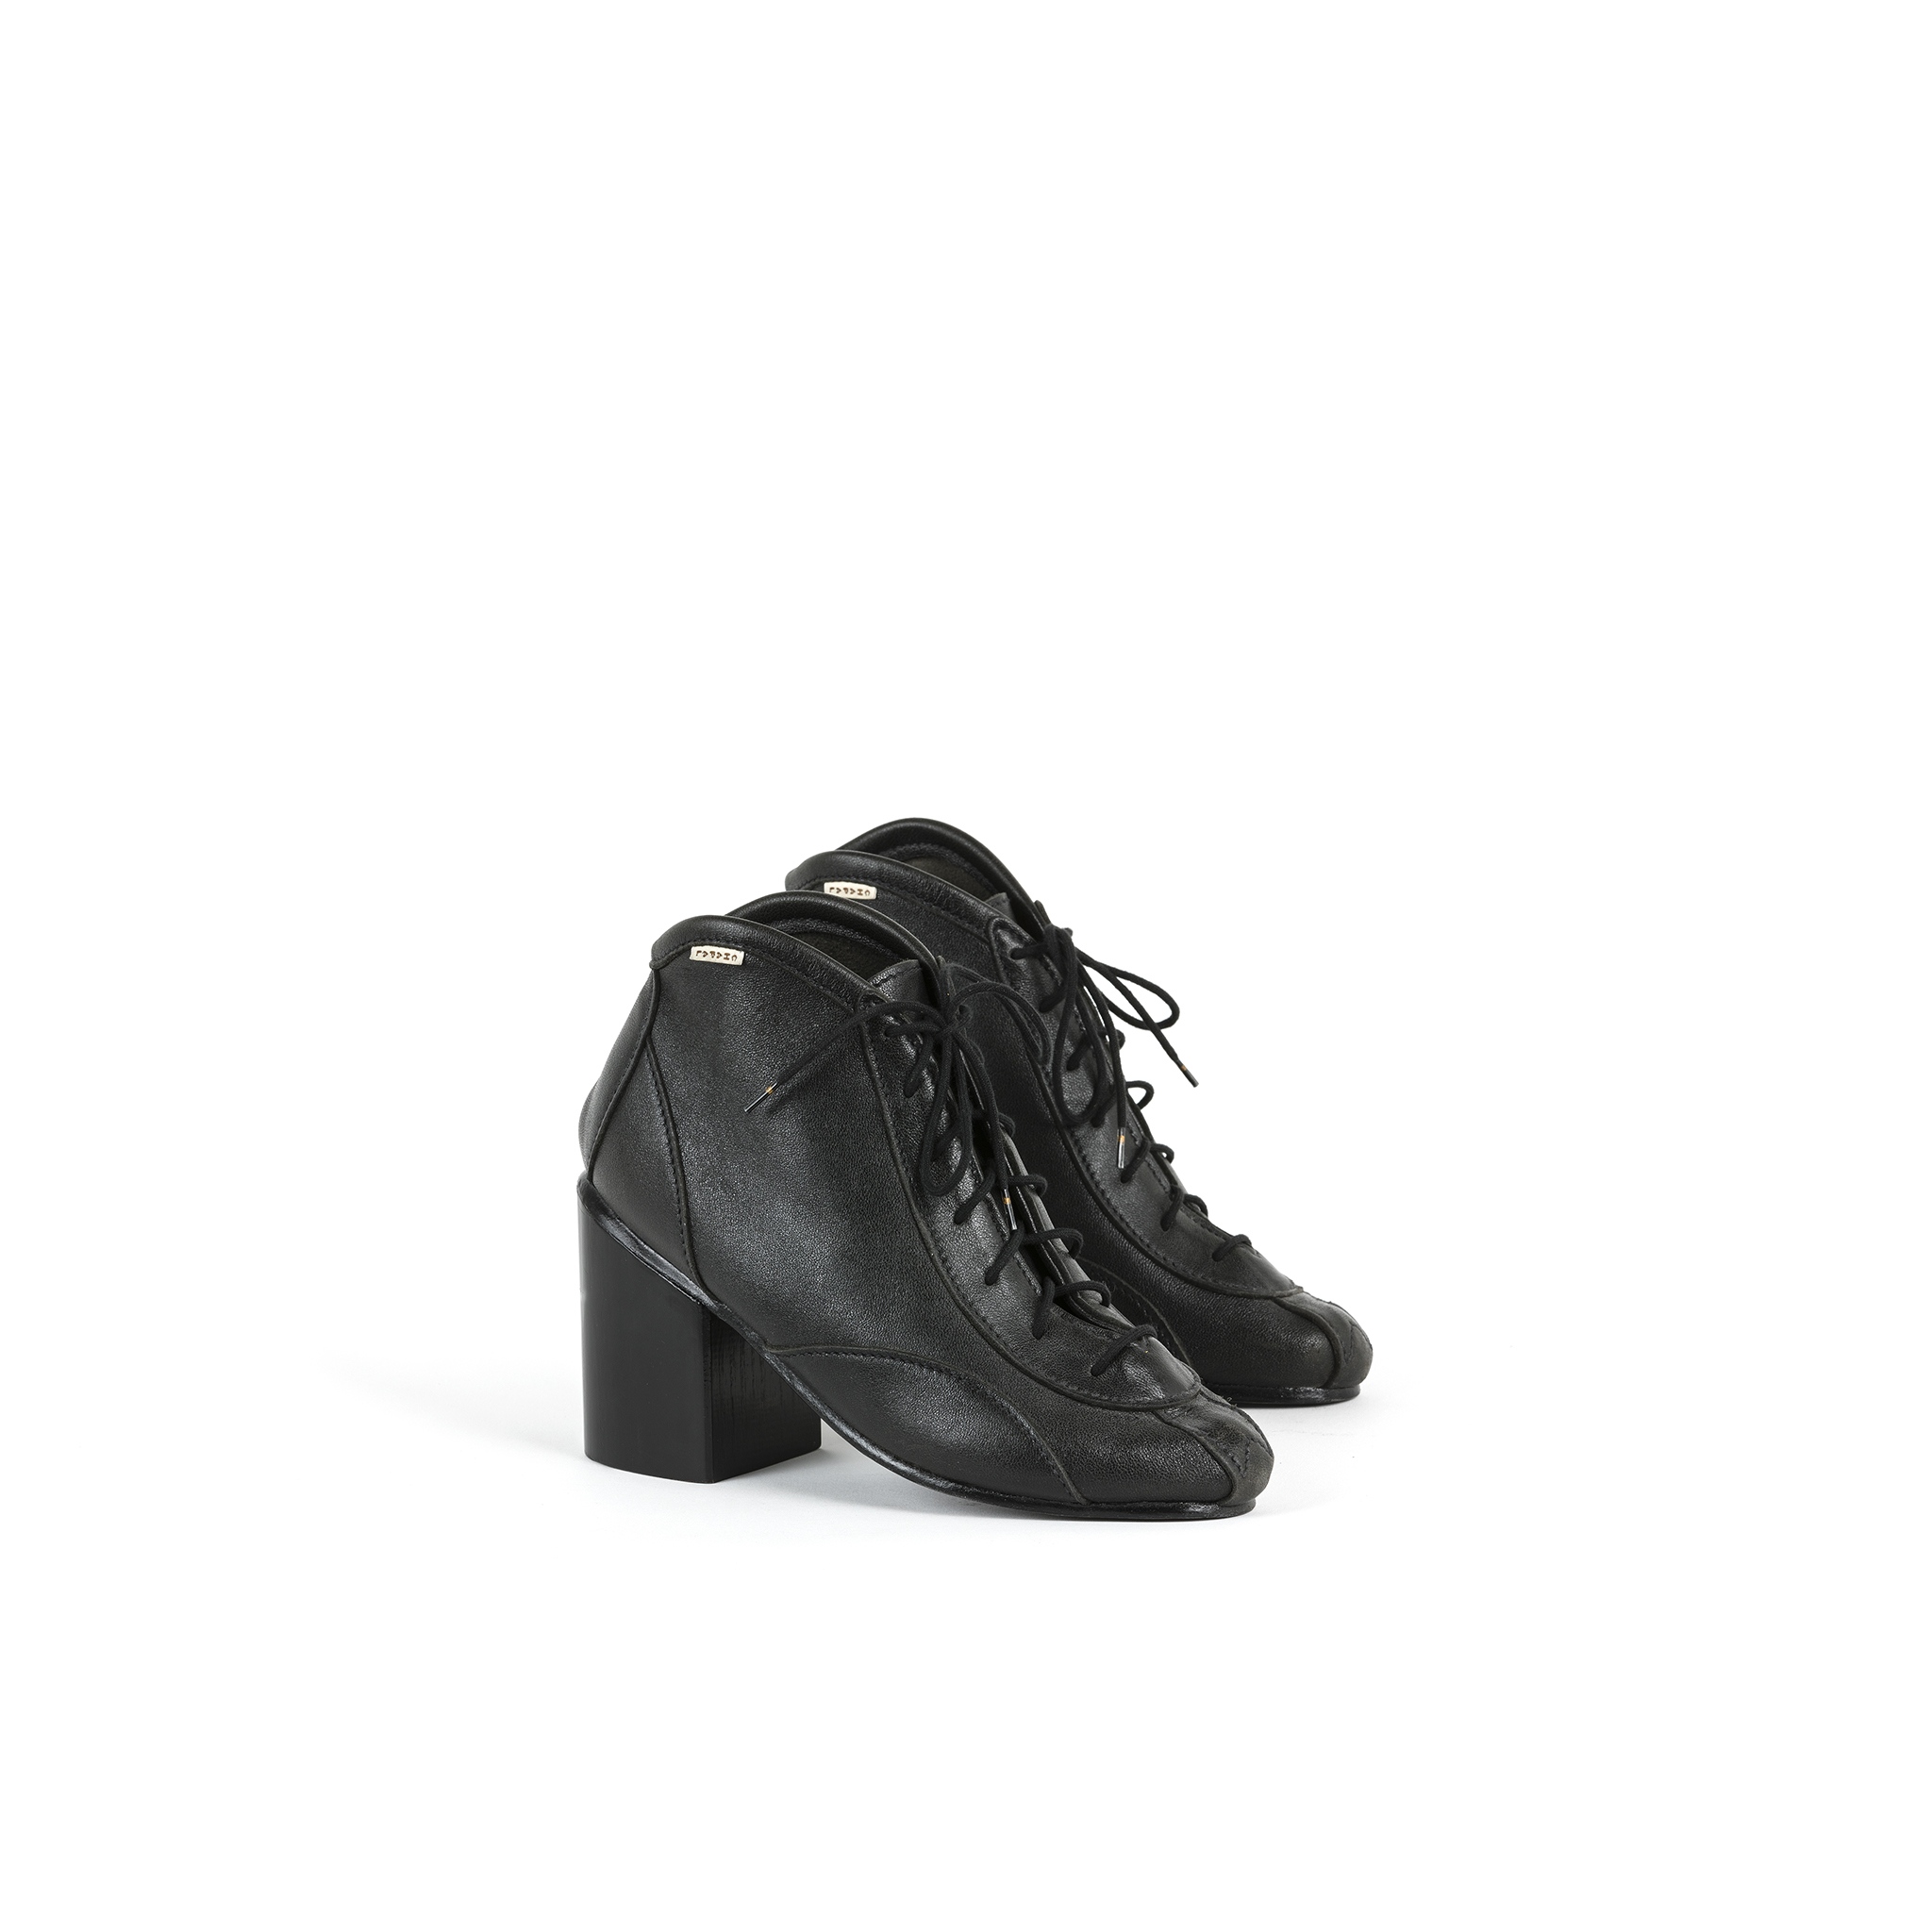 Pilot 60's High Heels - Glossy leather - Black color